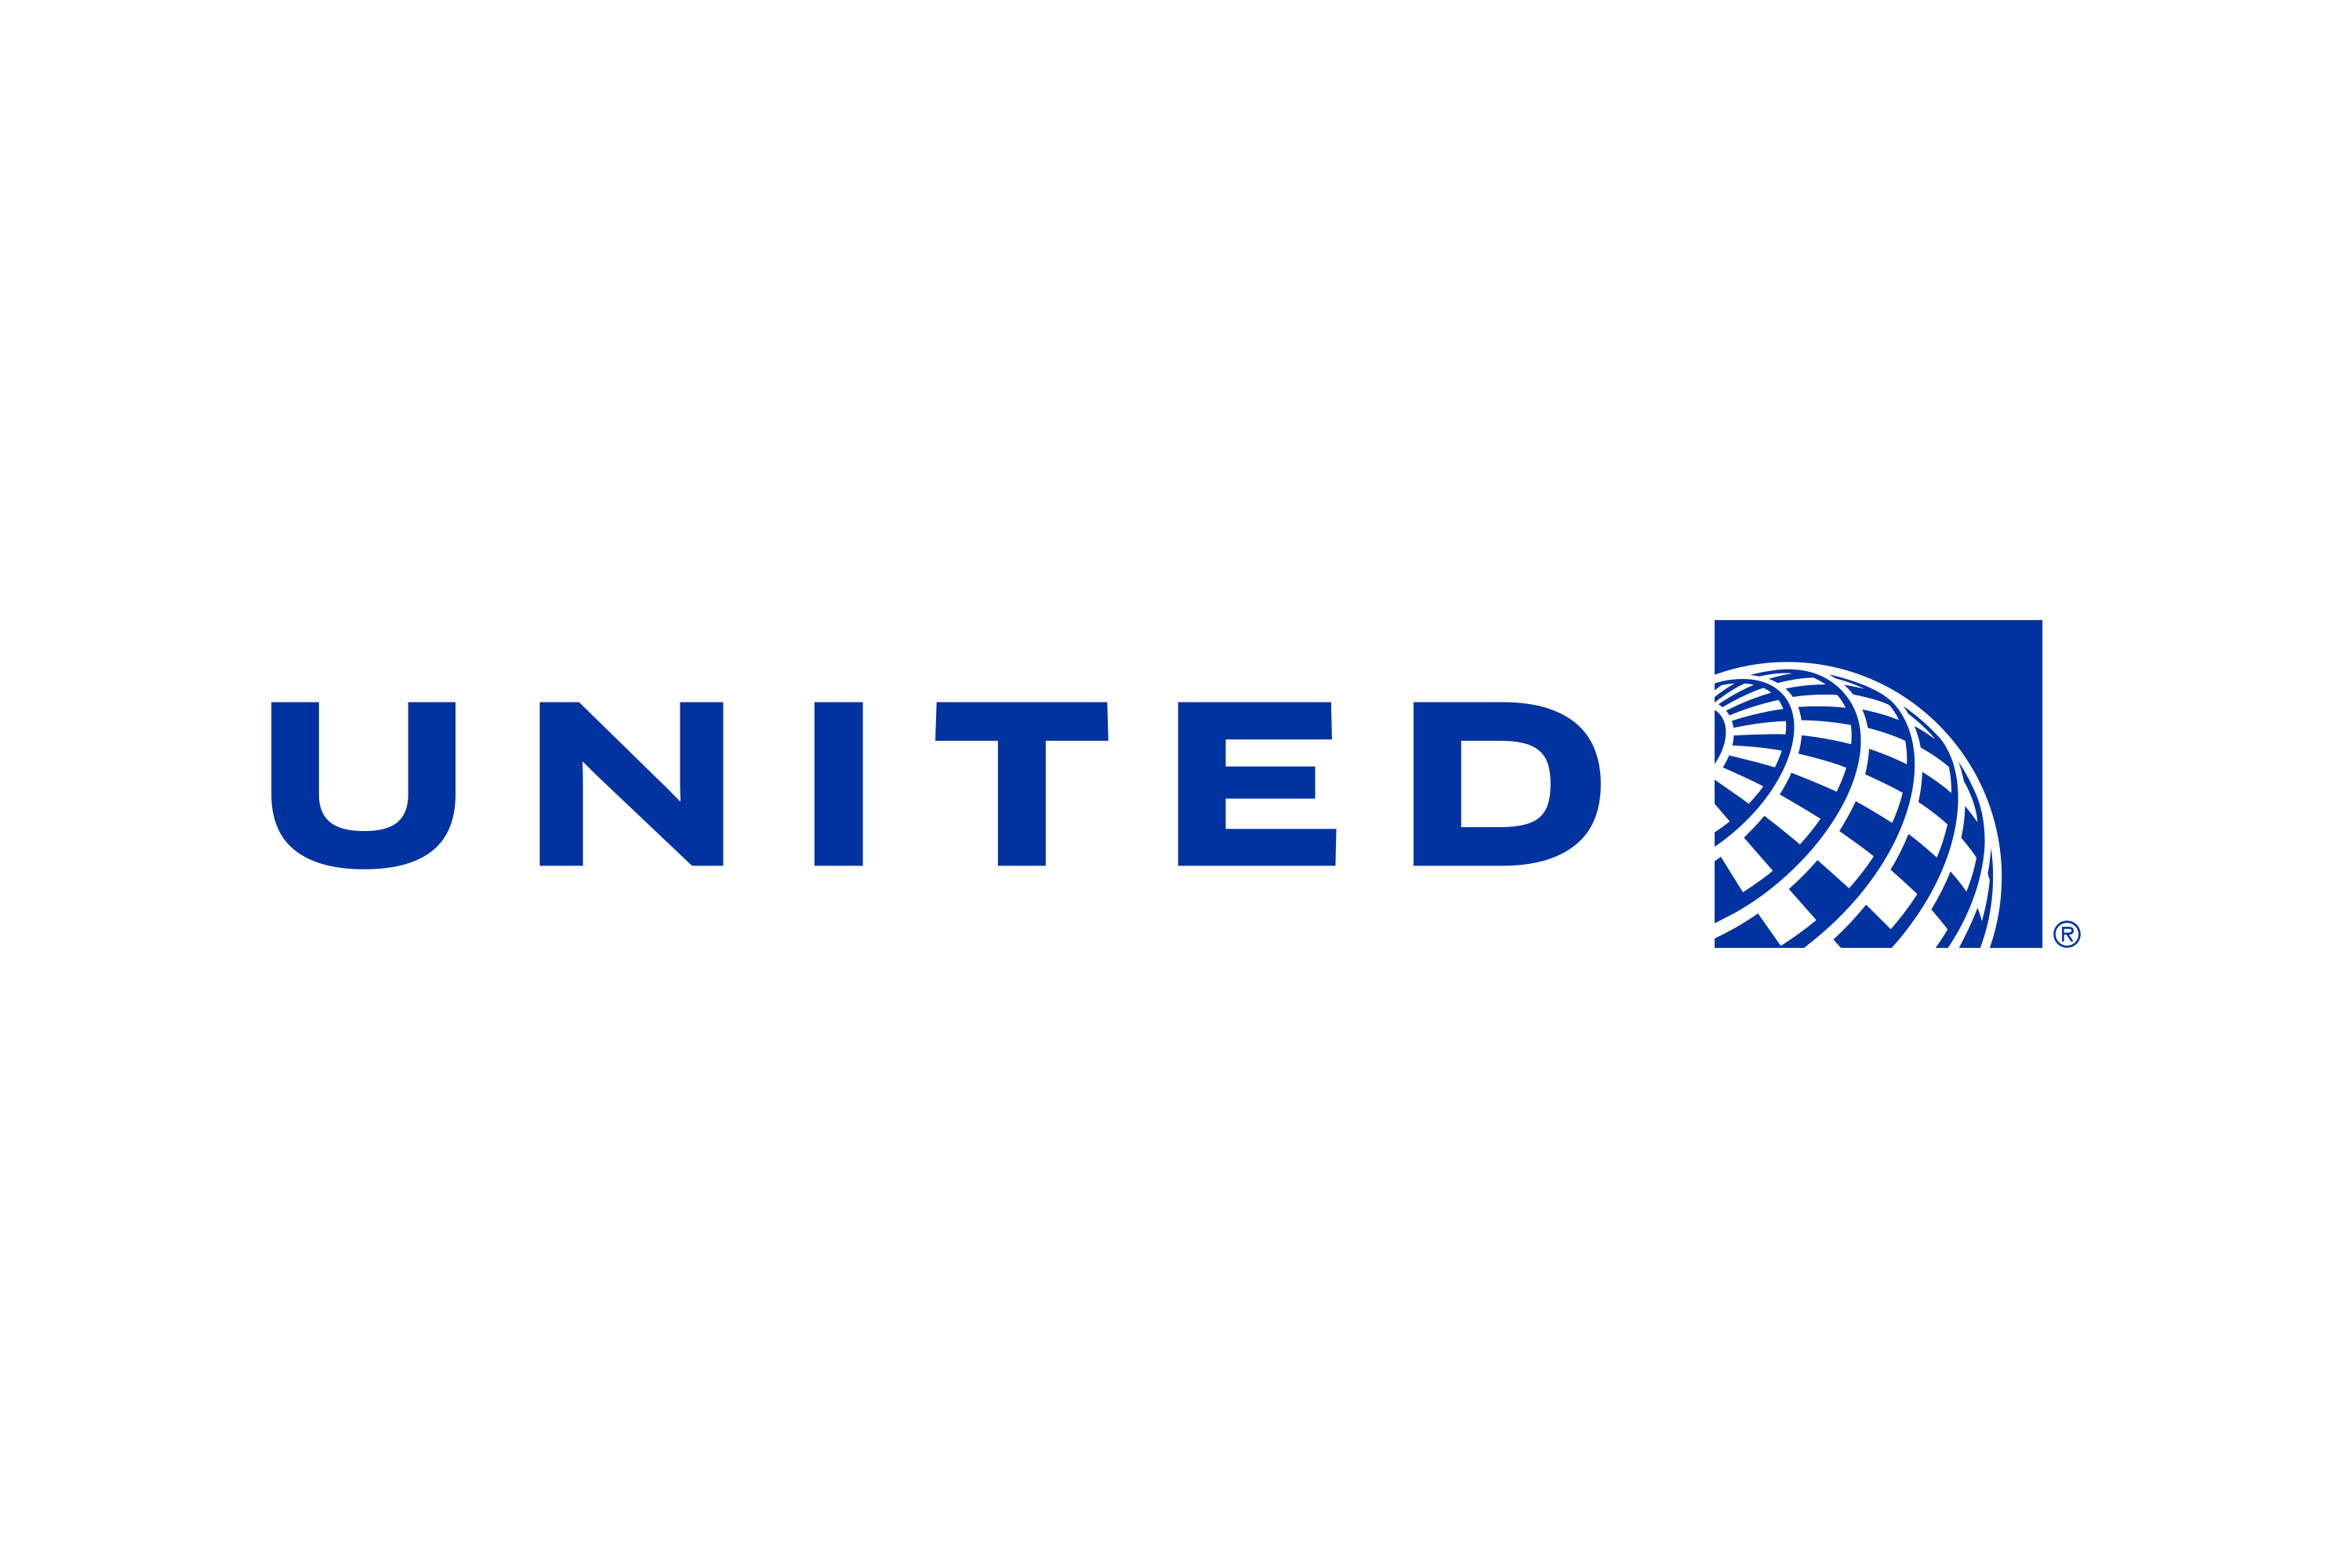 United Airlines Logo - Free download logo in SVG or PNG format